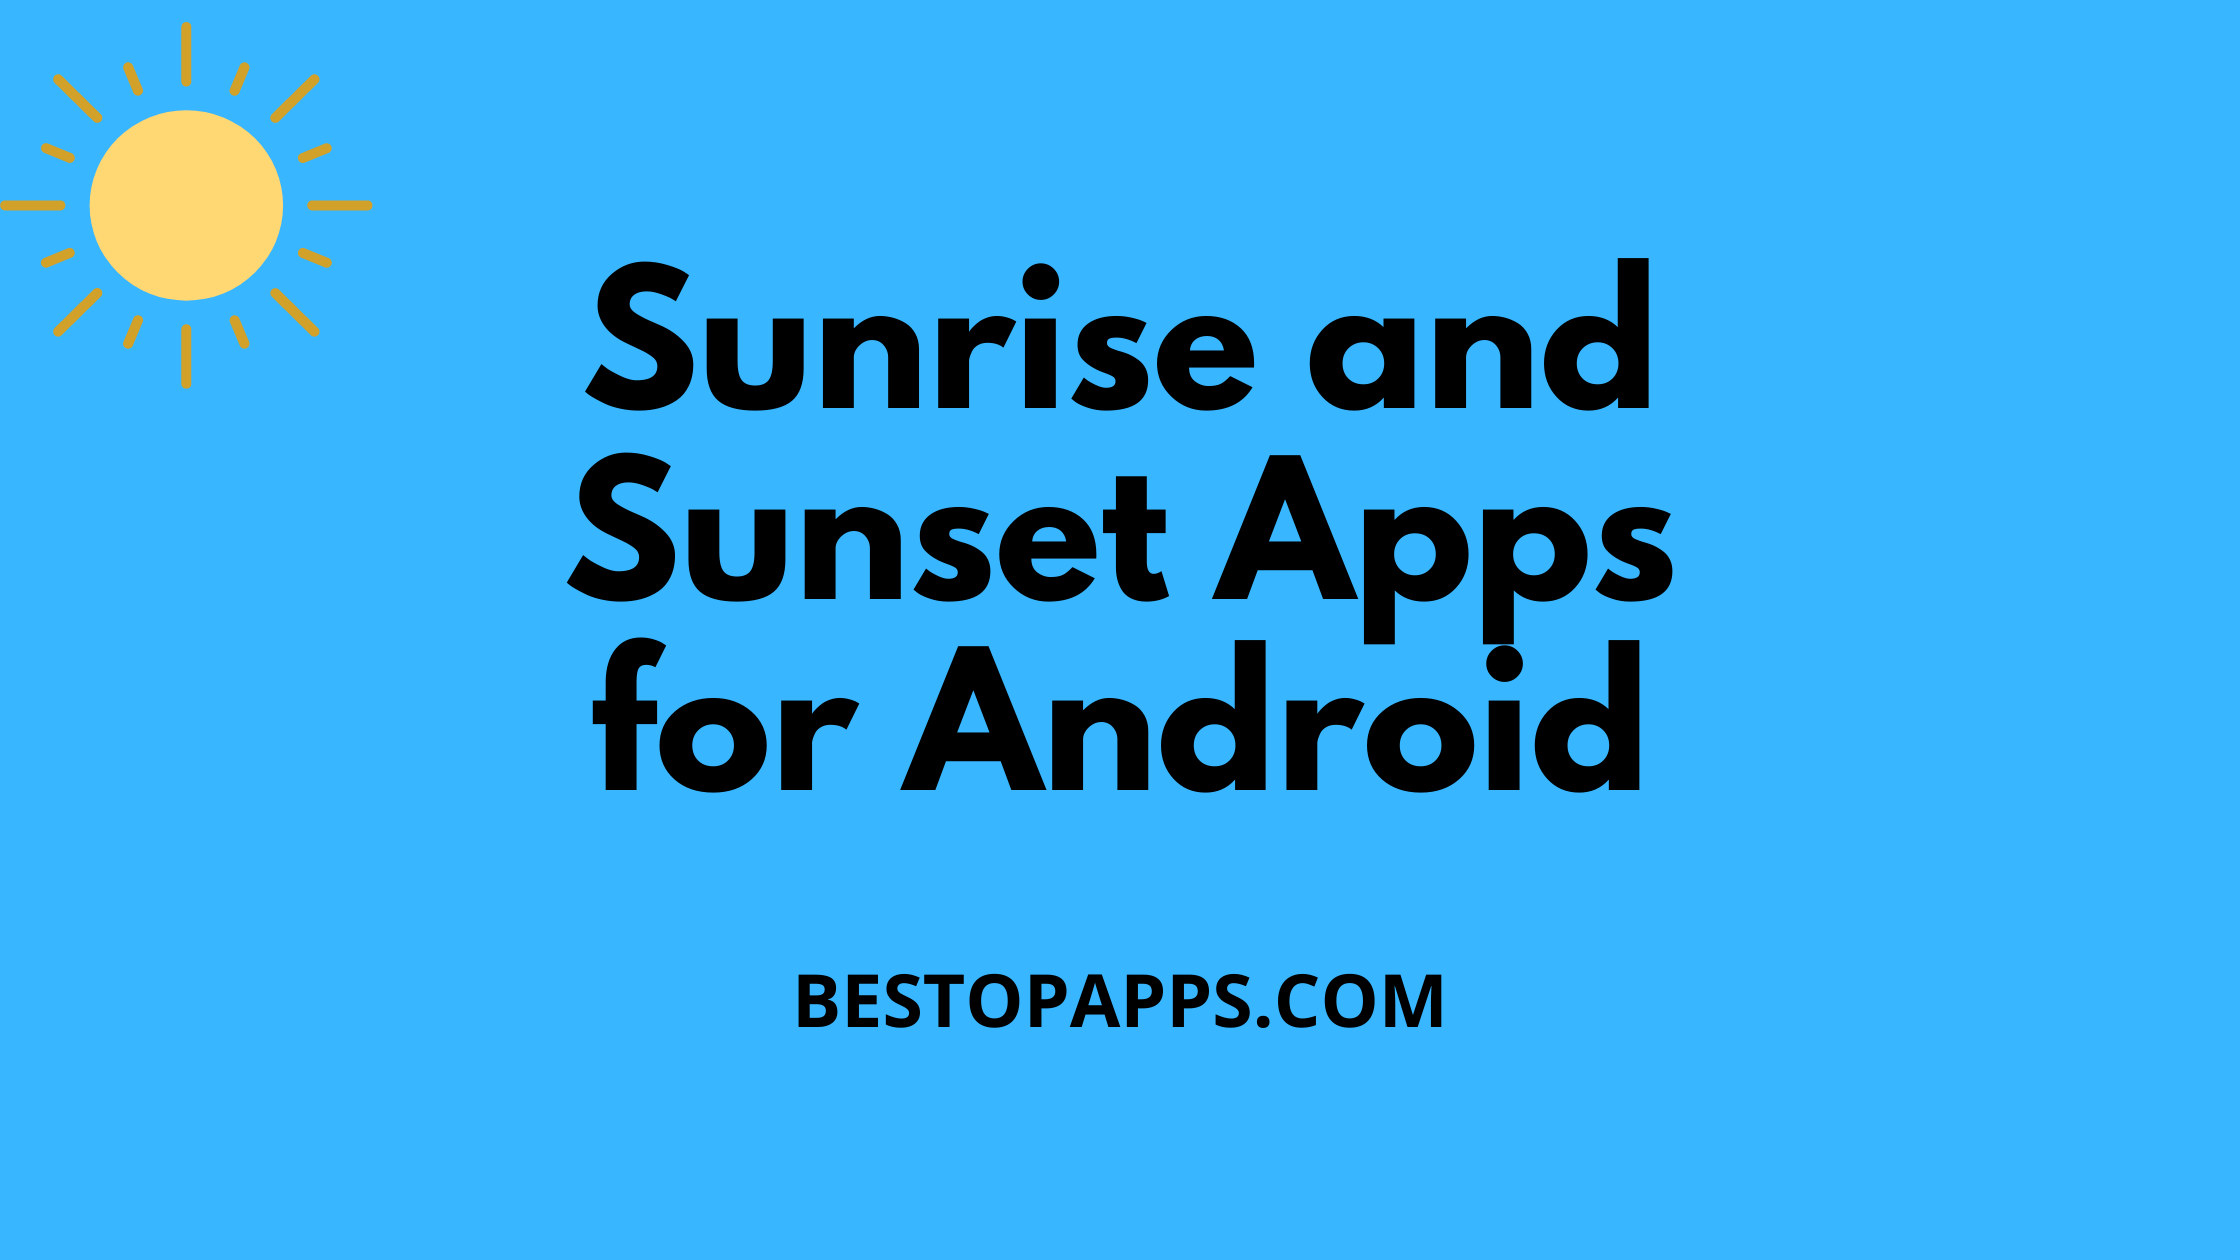 Sunrise and Sunset Apps for Android